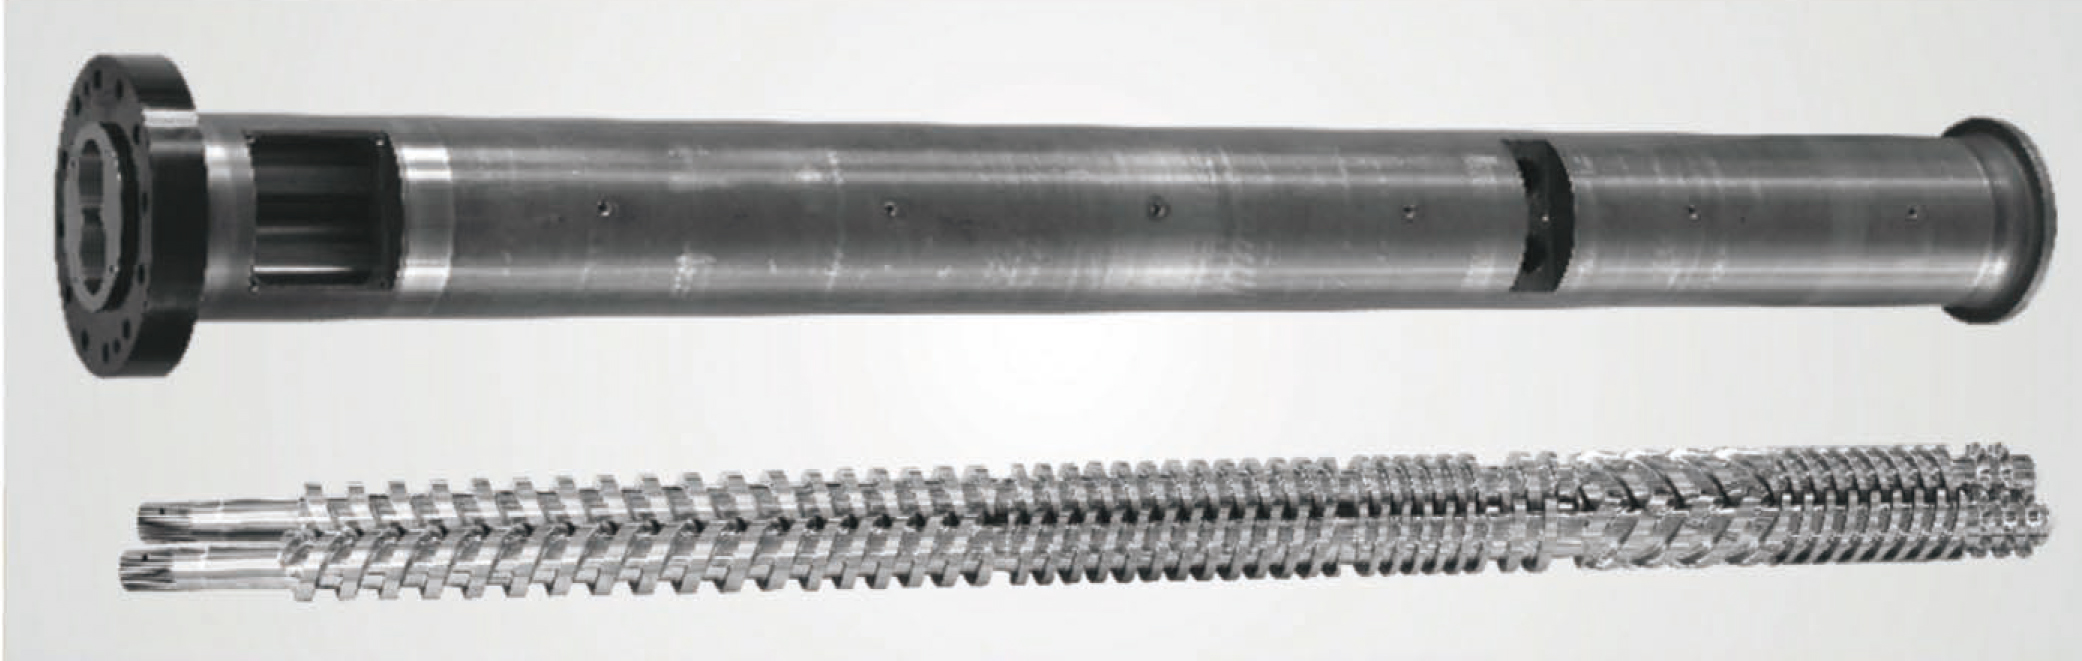 Parallel twin screw barrel for PVC pipe and profile